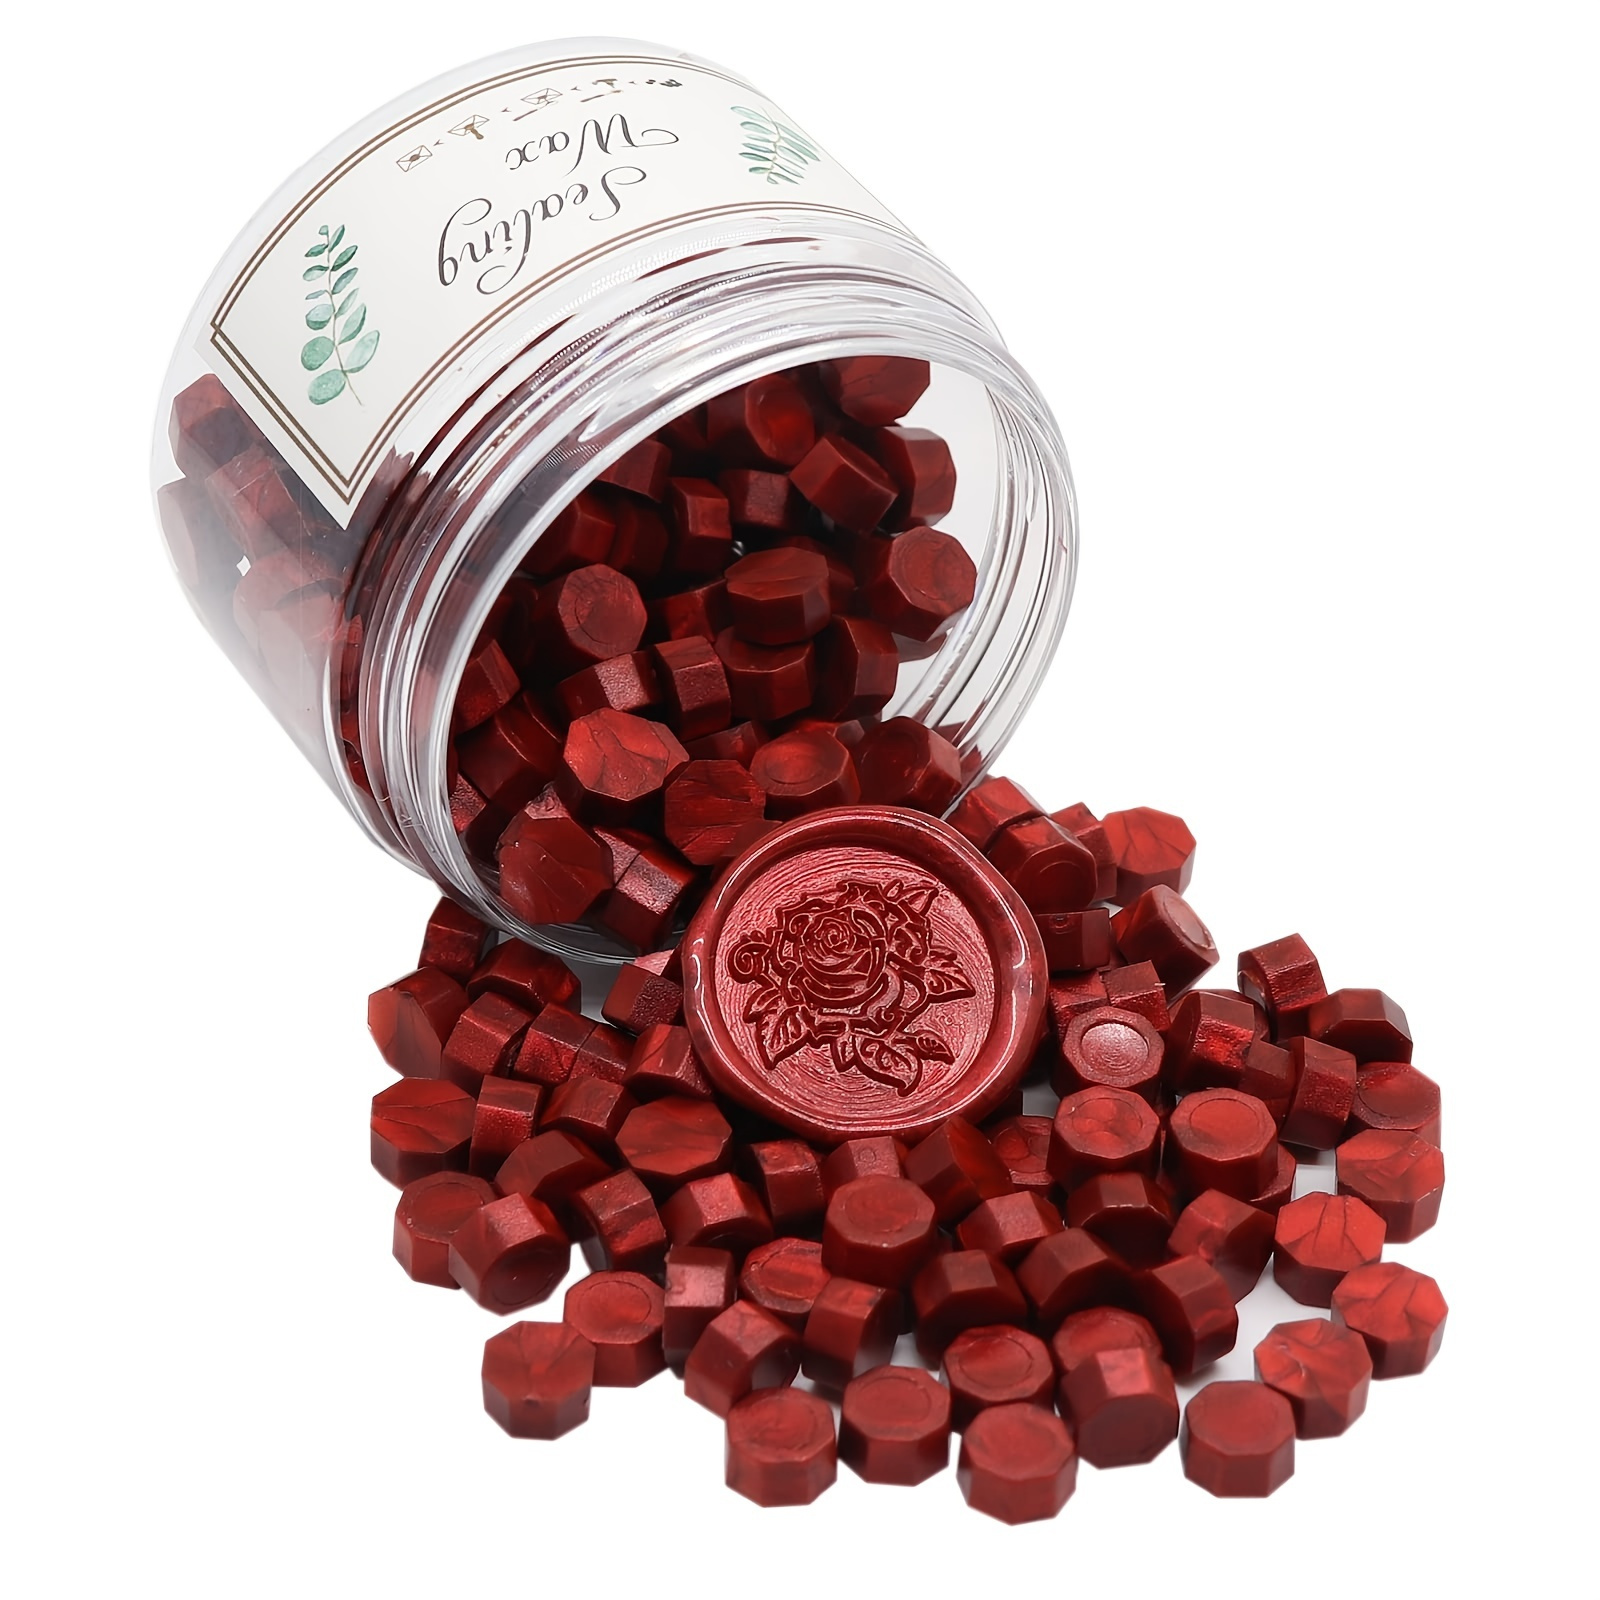 Burgundy Premium Sealing Wax Beads by Color 2oz in Tin with spoon